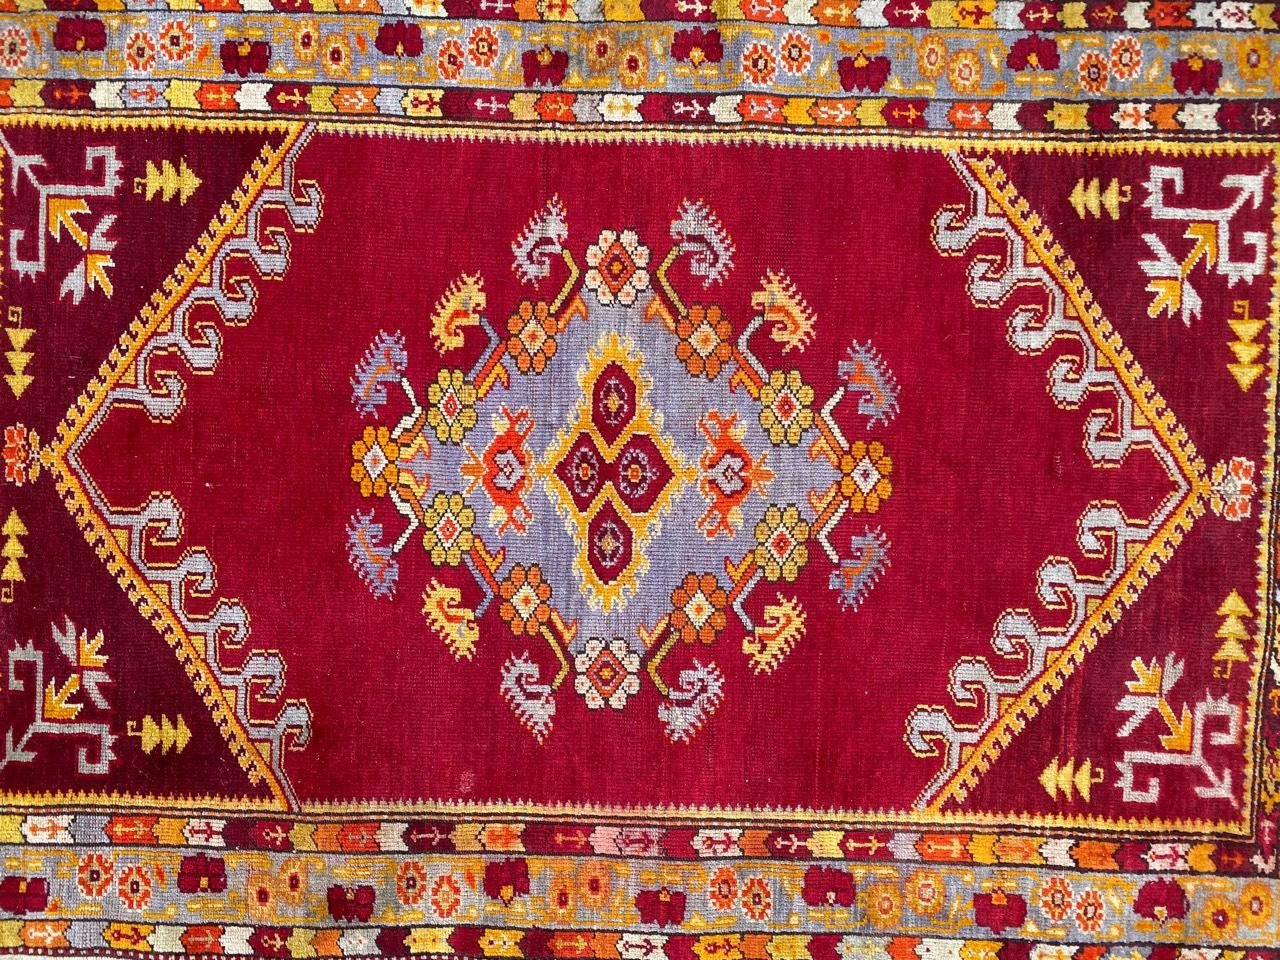 Very beautiful early 20th century Turkish rug with a beautiful design with a central medallion and nice colors with red, blue, yellow, orange and purple, entirely and finely hand knotted with wool velvet on wool foundation.

✨✨✨
